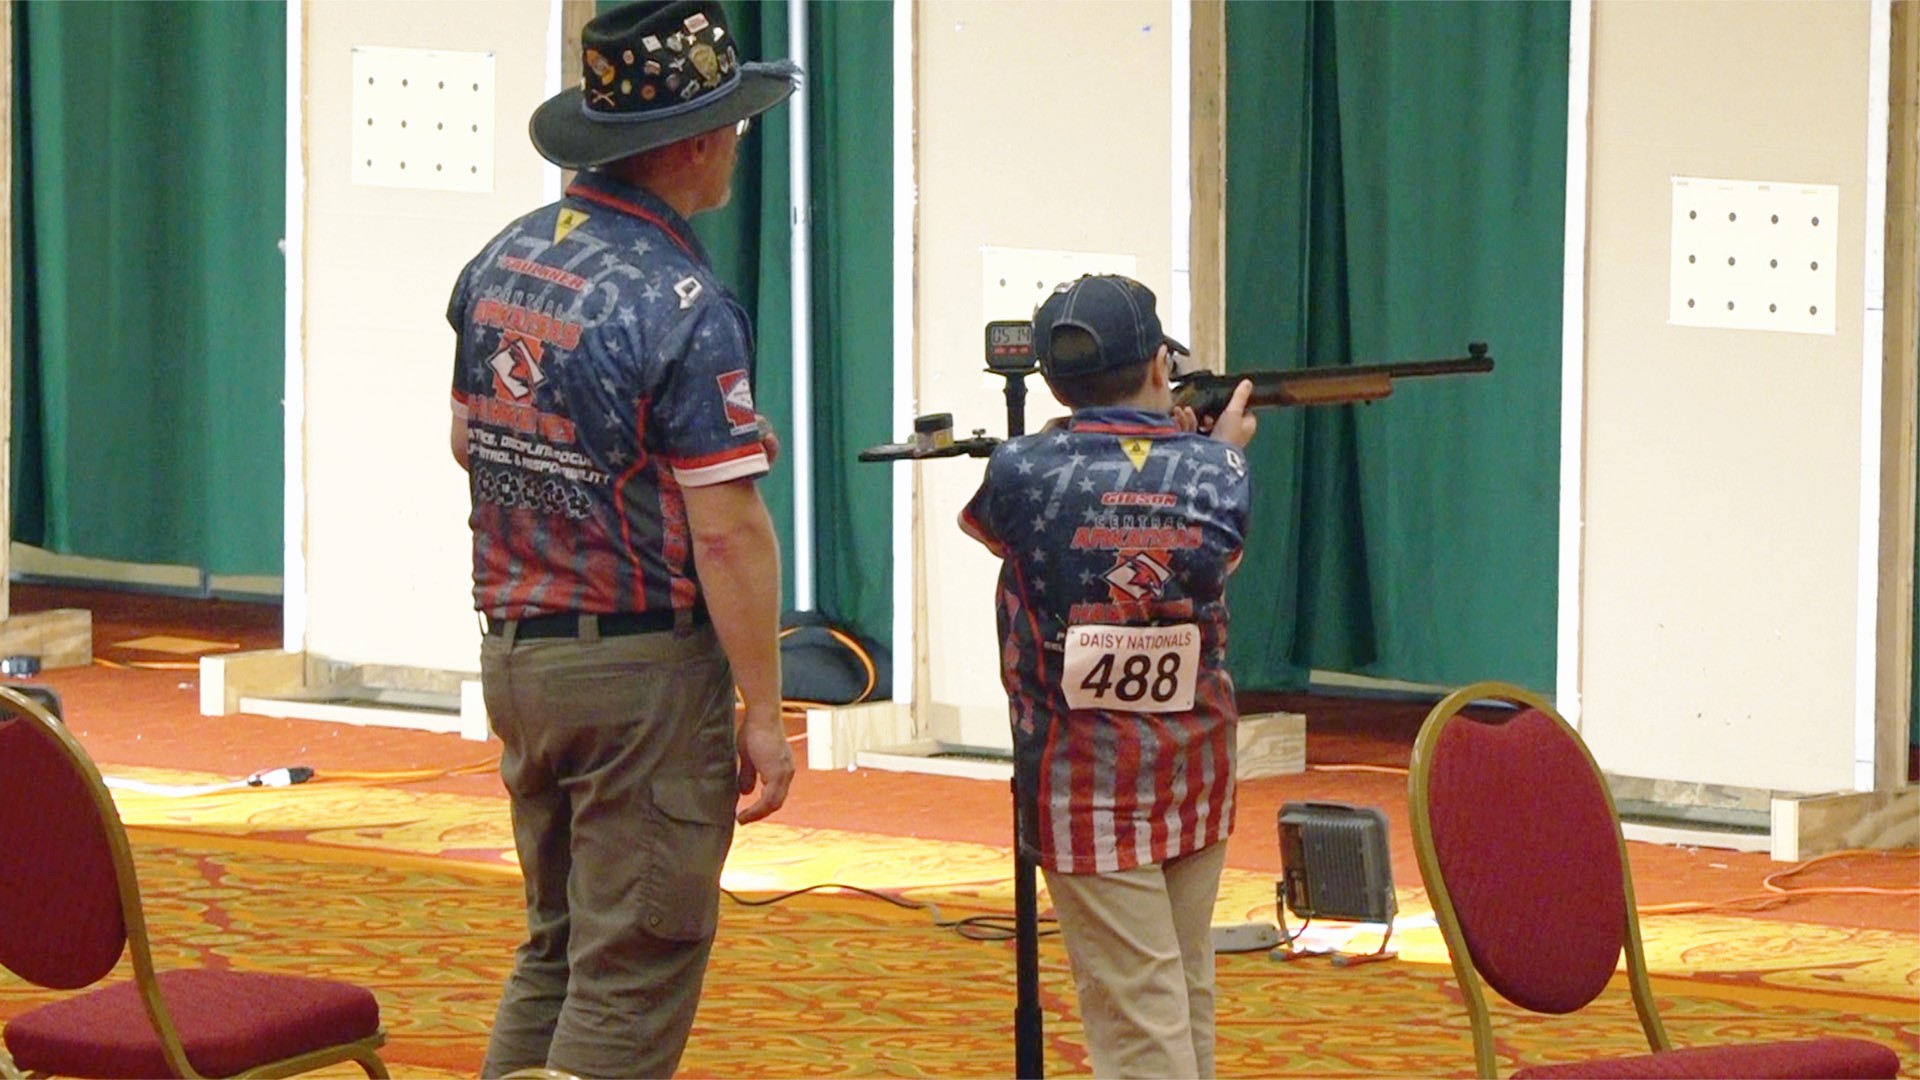 The 56th Daisy National BB Gun Championship is in Rogers this weekend. The competition brings qualifying 8 to 15-year-olds from across the country.